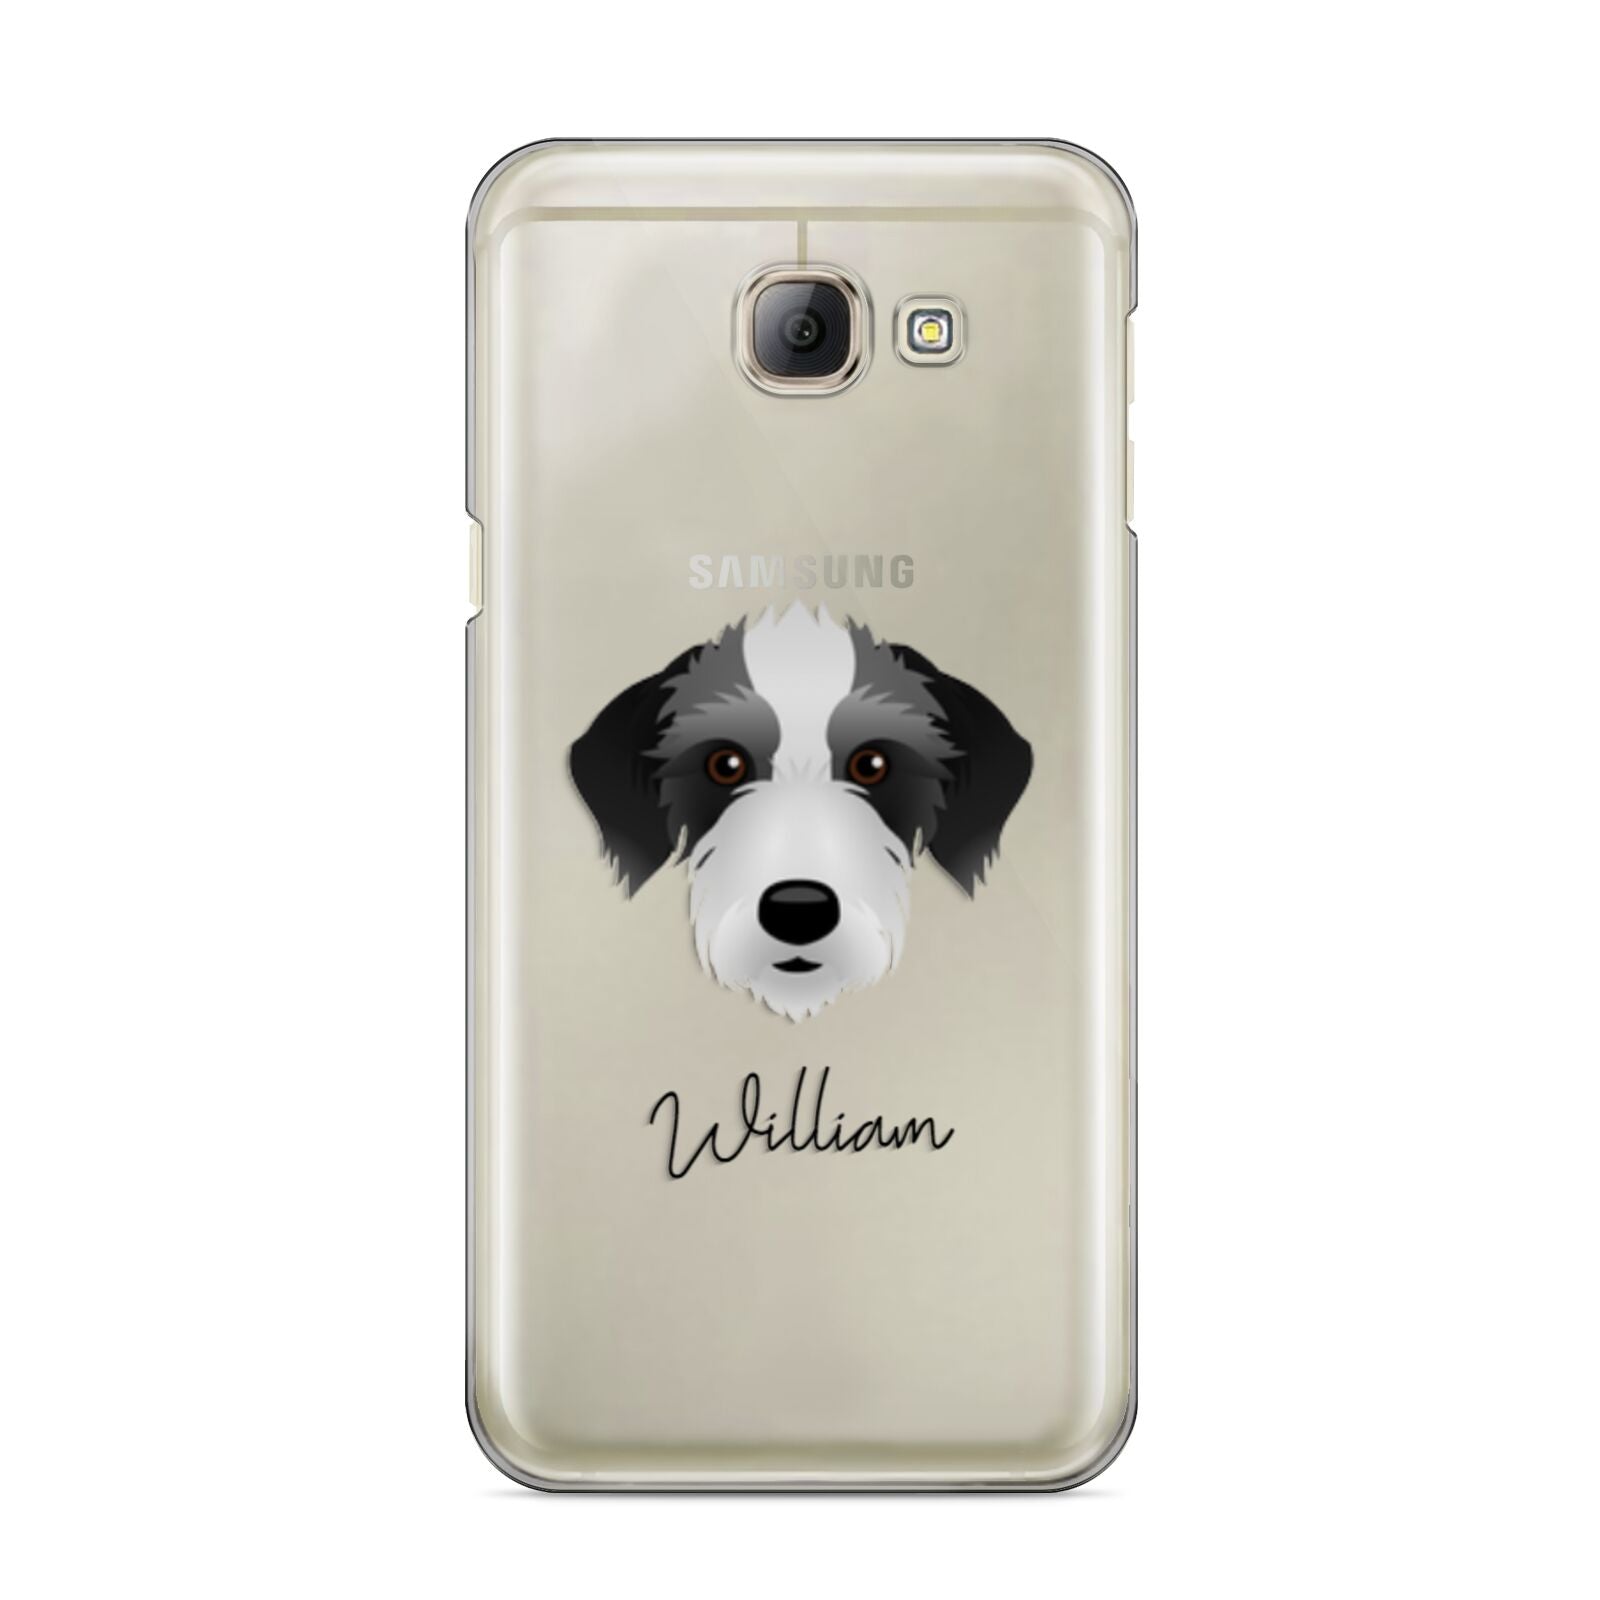 Bedlington Whippet Personalised Samsung Galaxy A8 2016 Case